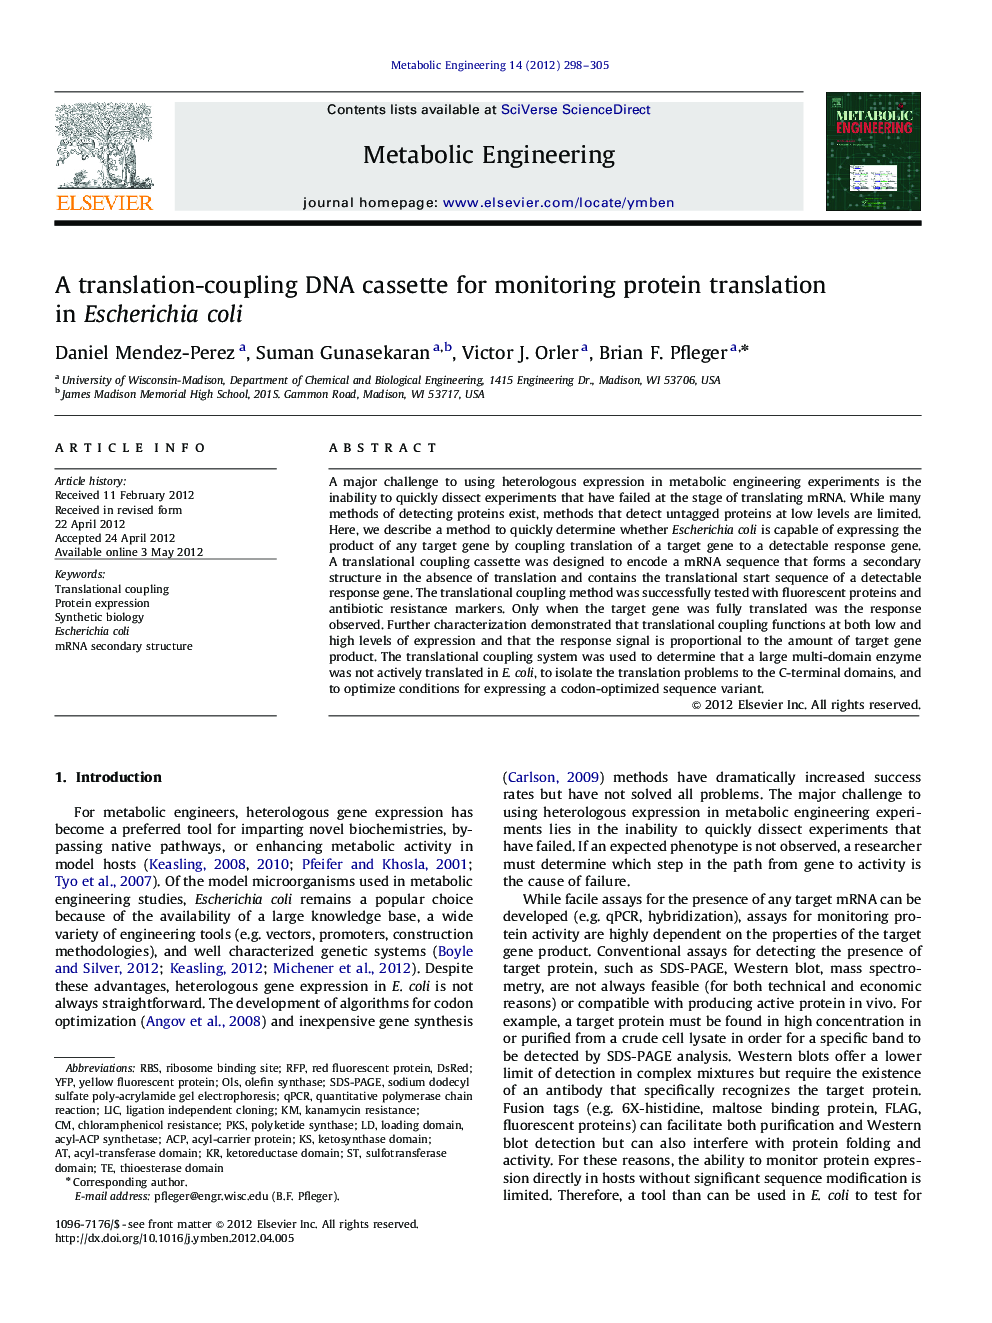 A translation-coupling DNA cassette for monitoring protein translation in Escherichia coli